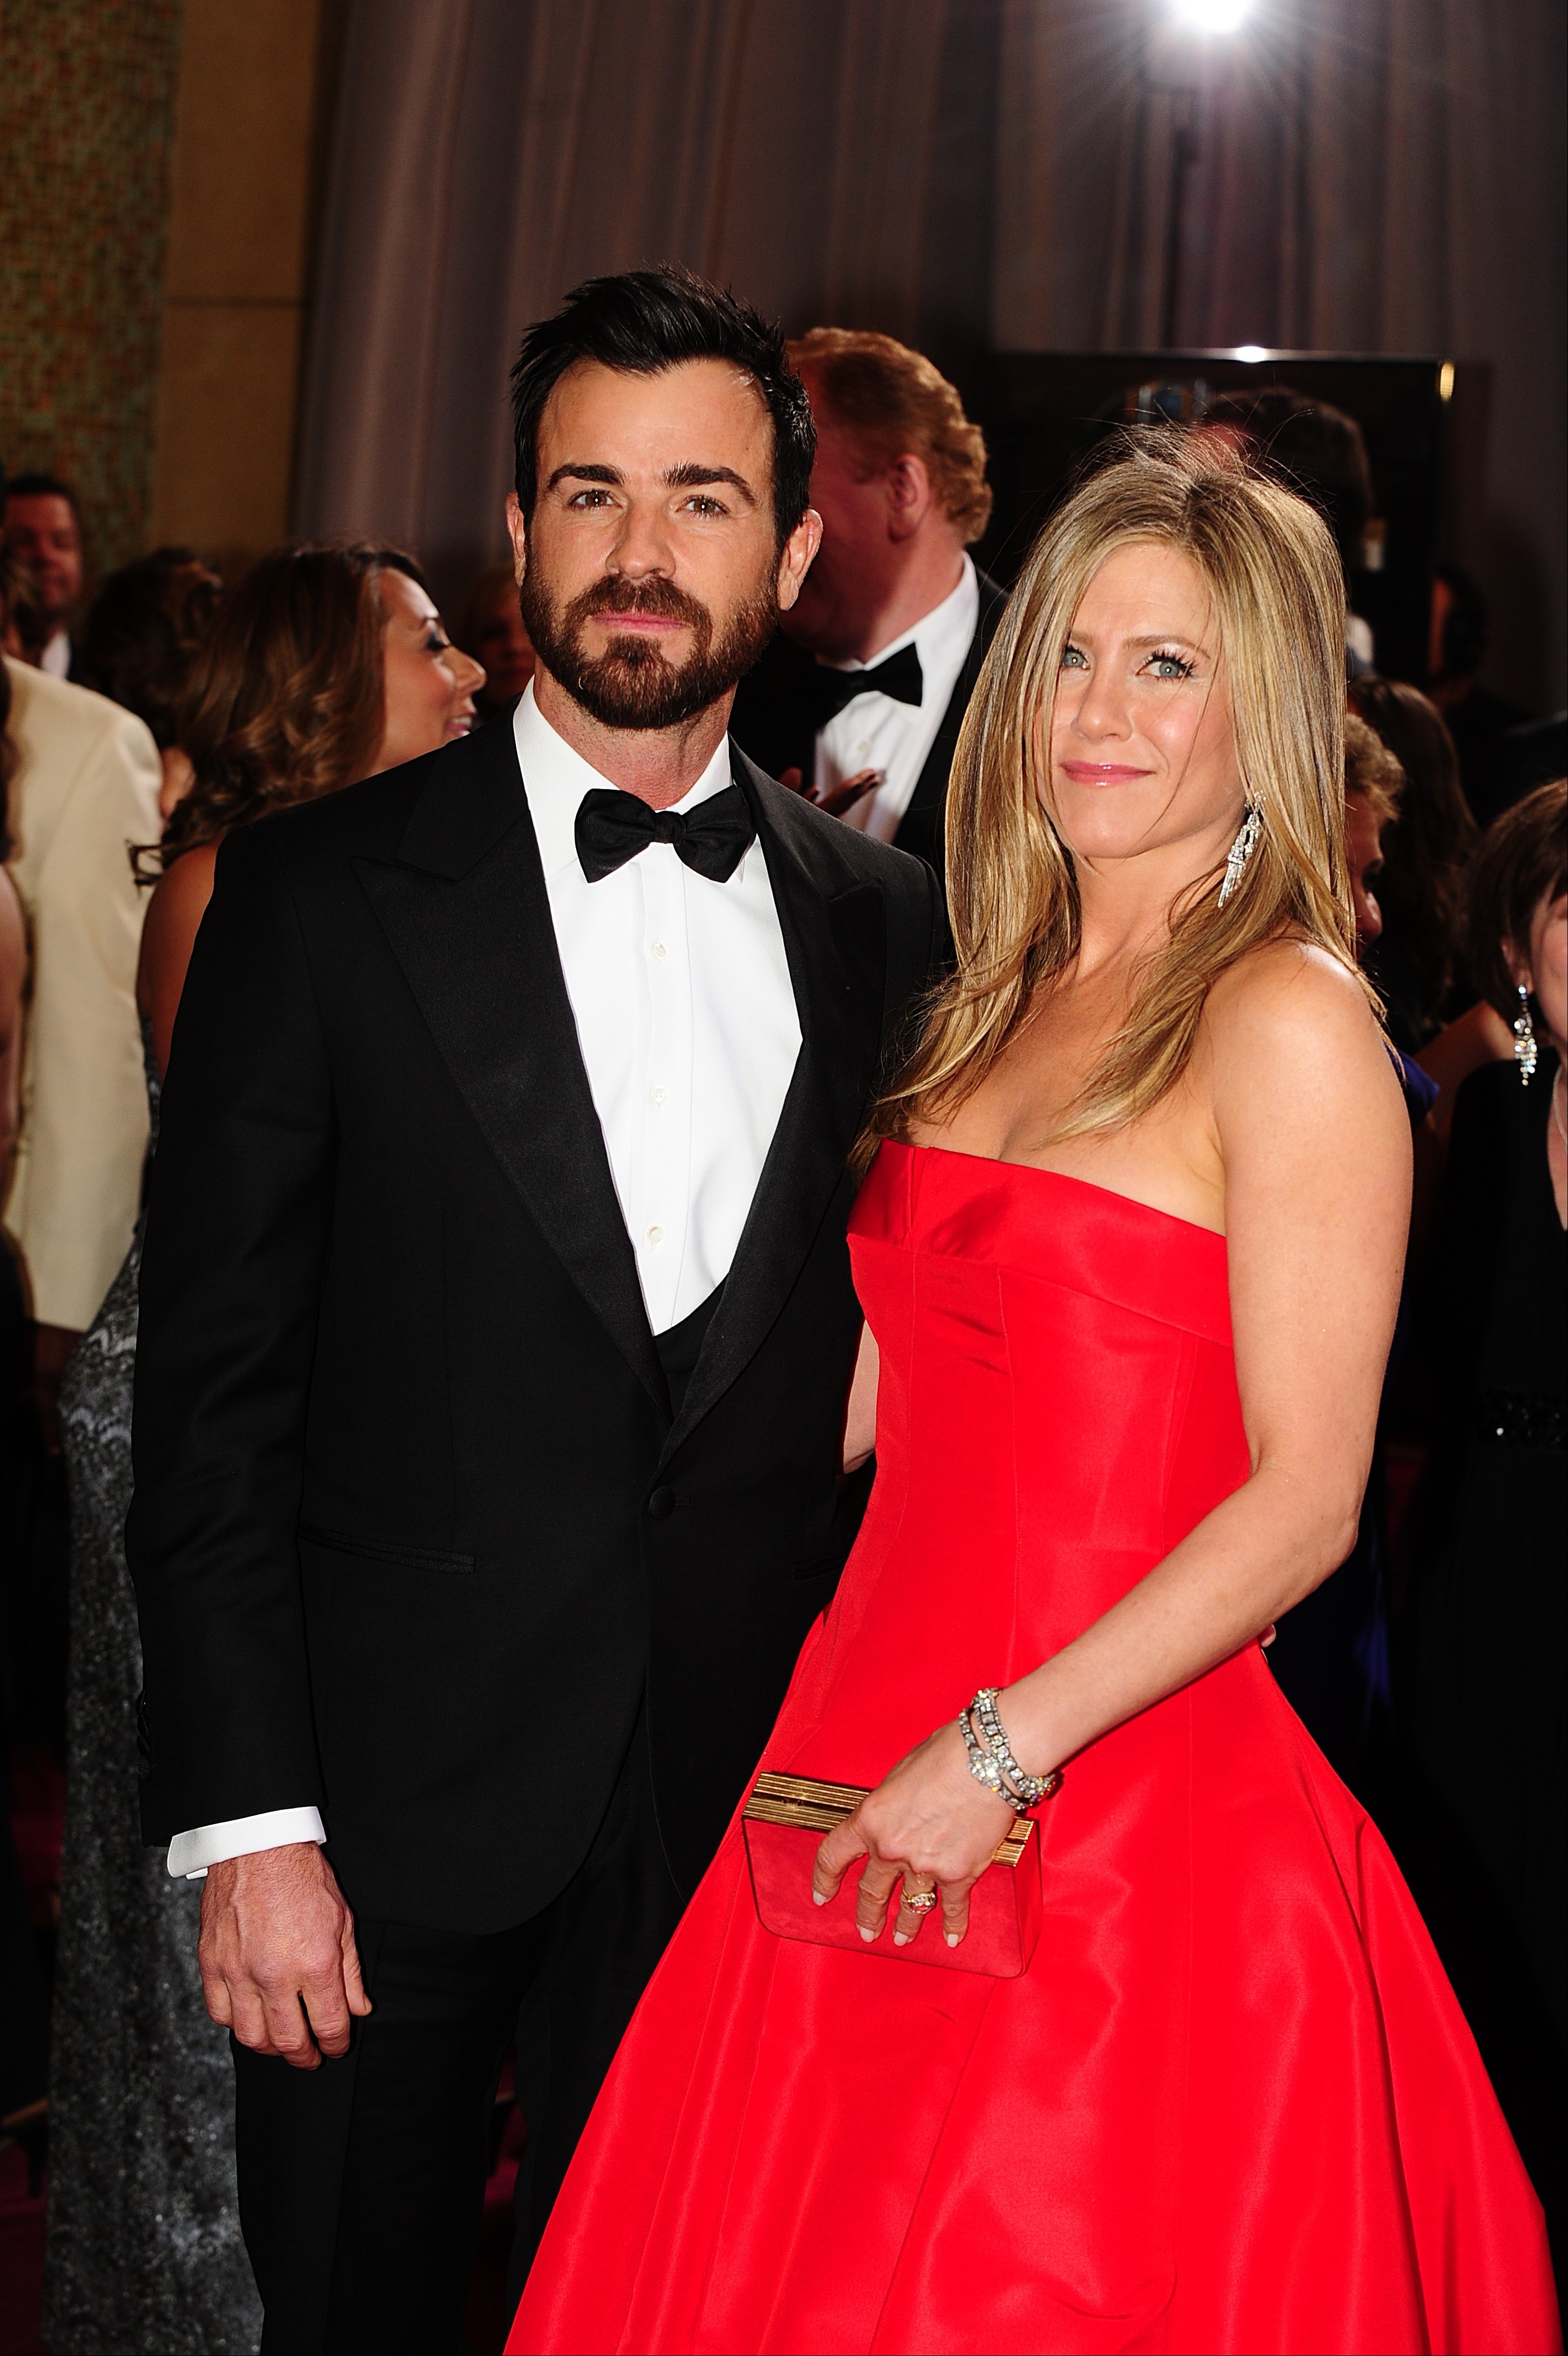 Justin Theroux and Jennifer Aniston arriving for the 85th Academy Awards